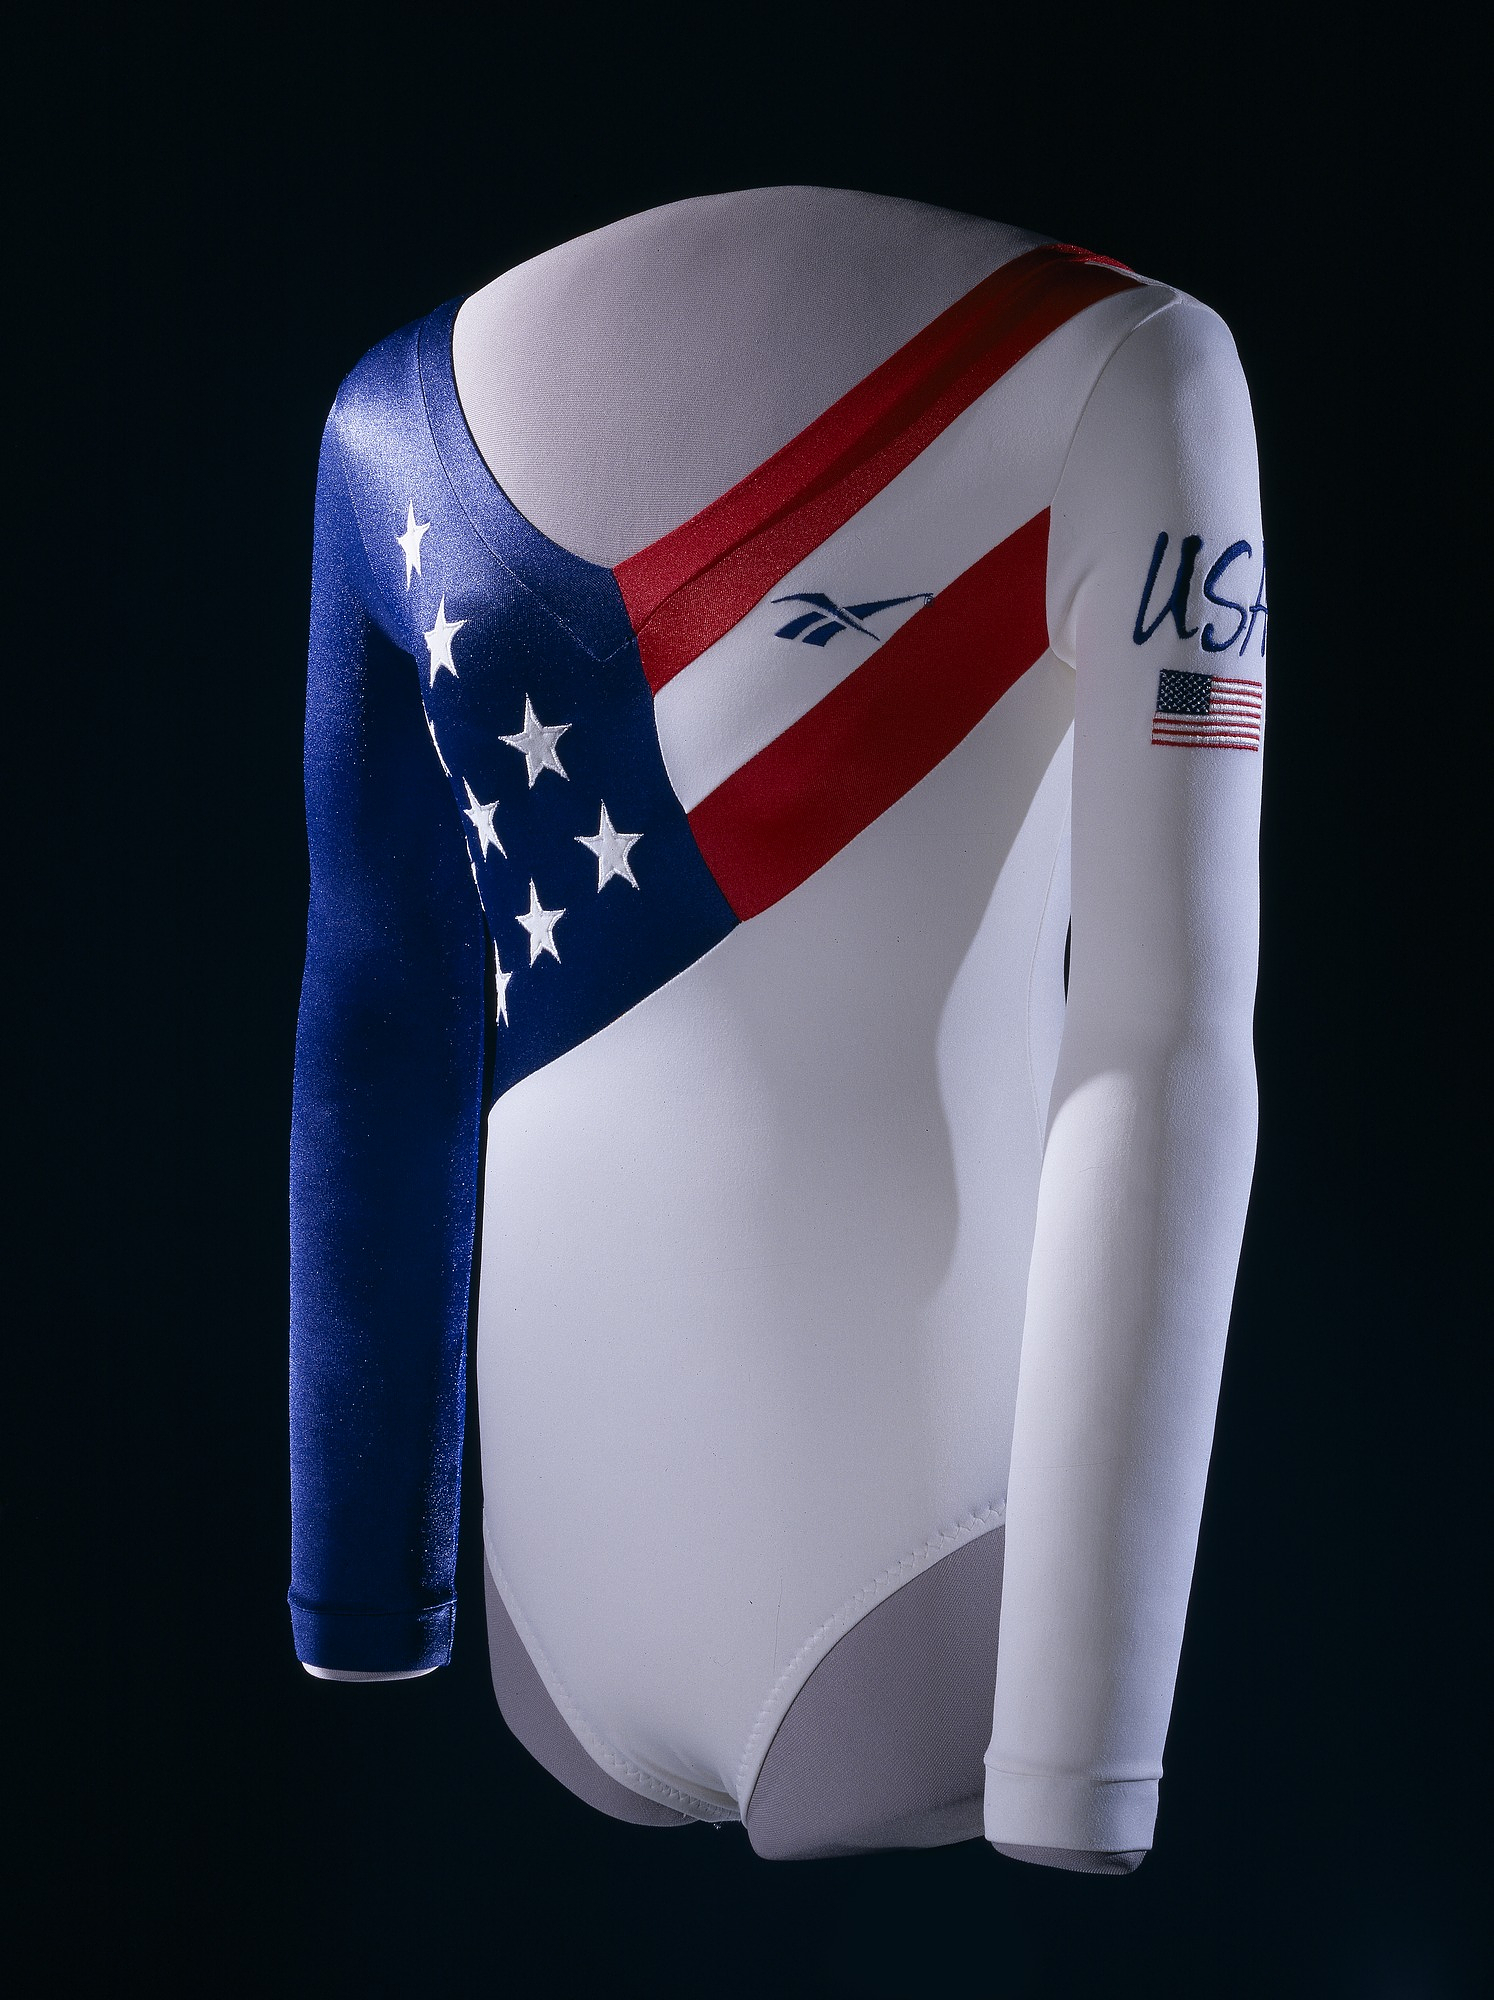 White leotard with long sleeves and imagery from the American flag